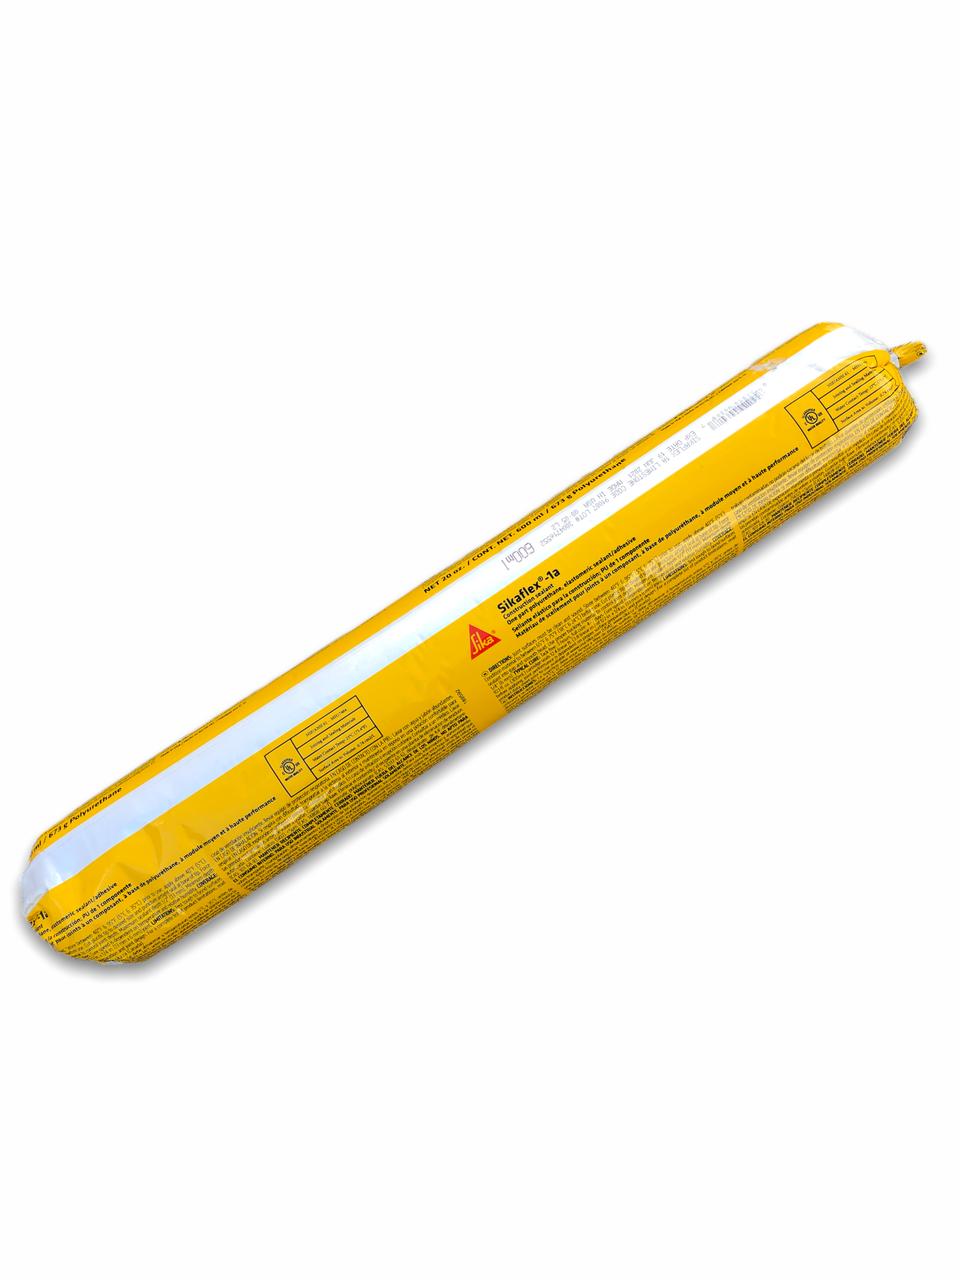 Sika Sikaflex 221, Plastic Cartage at Rs 381/cartridge in